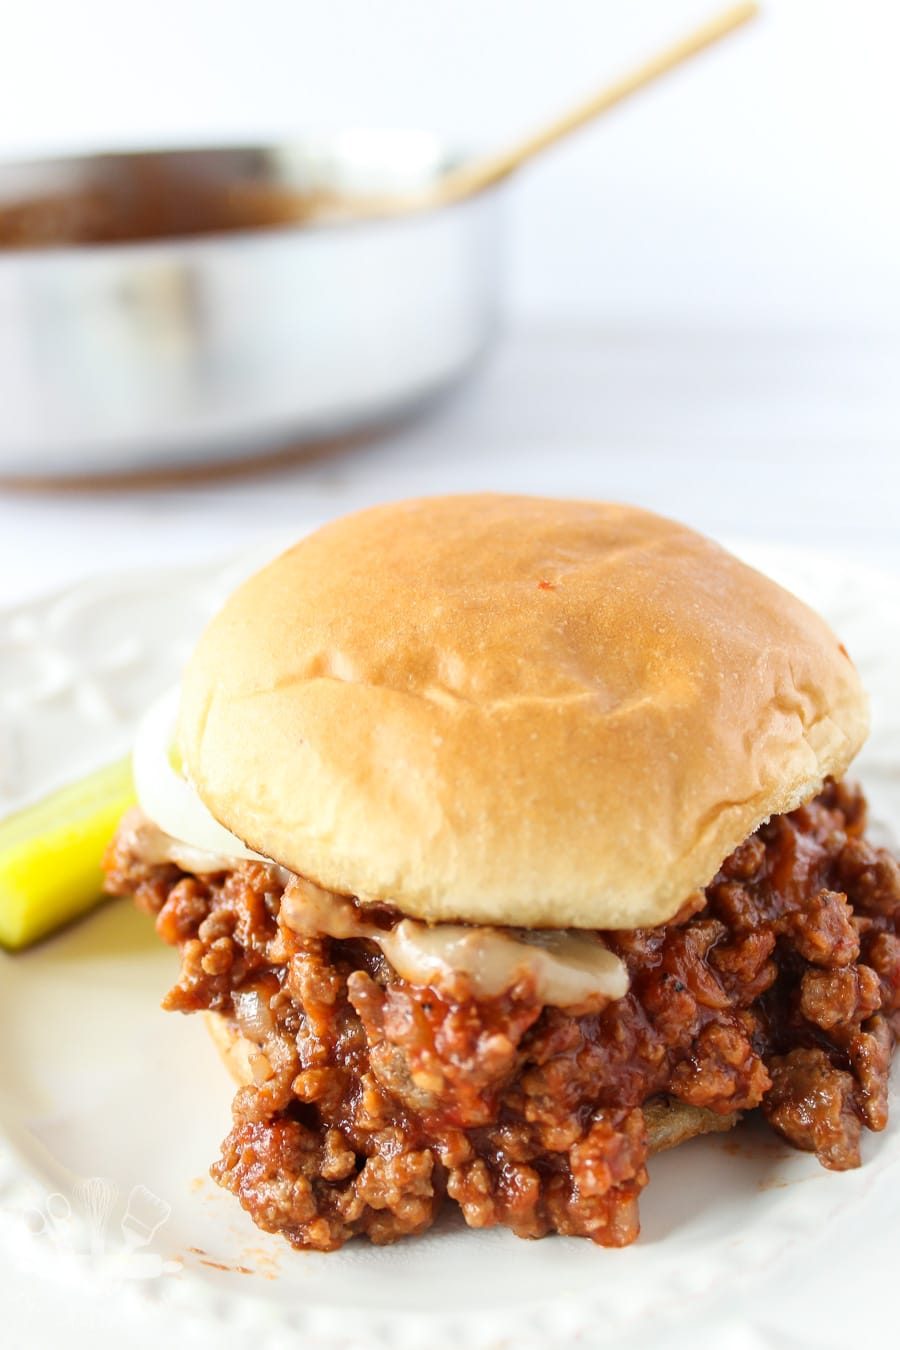 Sloppy joe sandwich with saute pan in the background